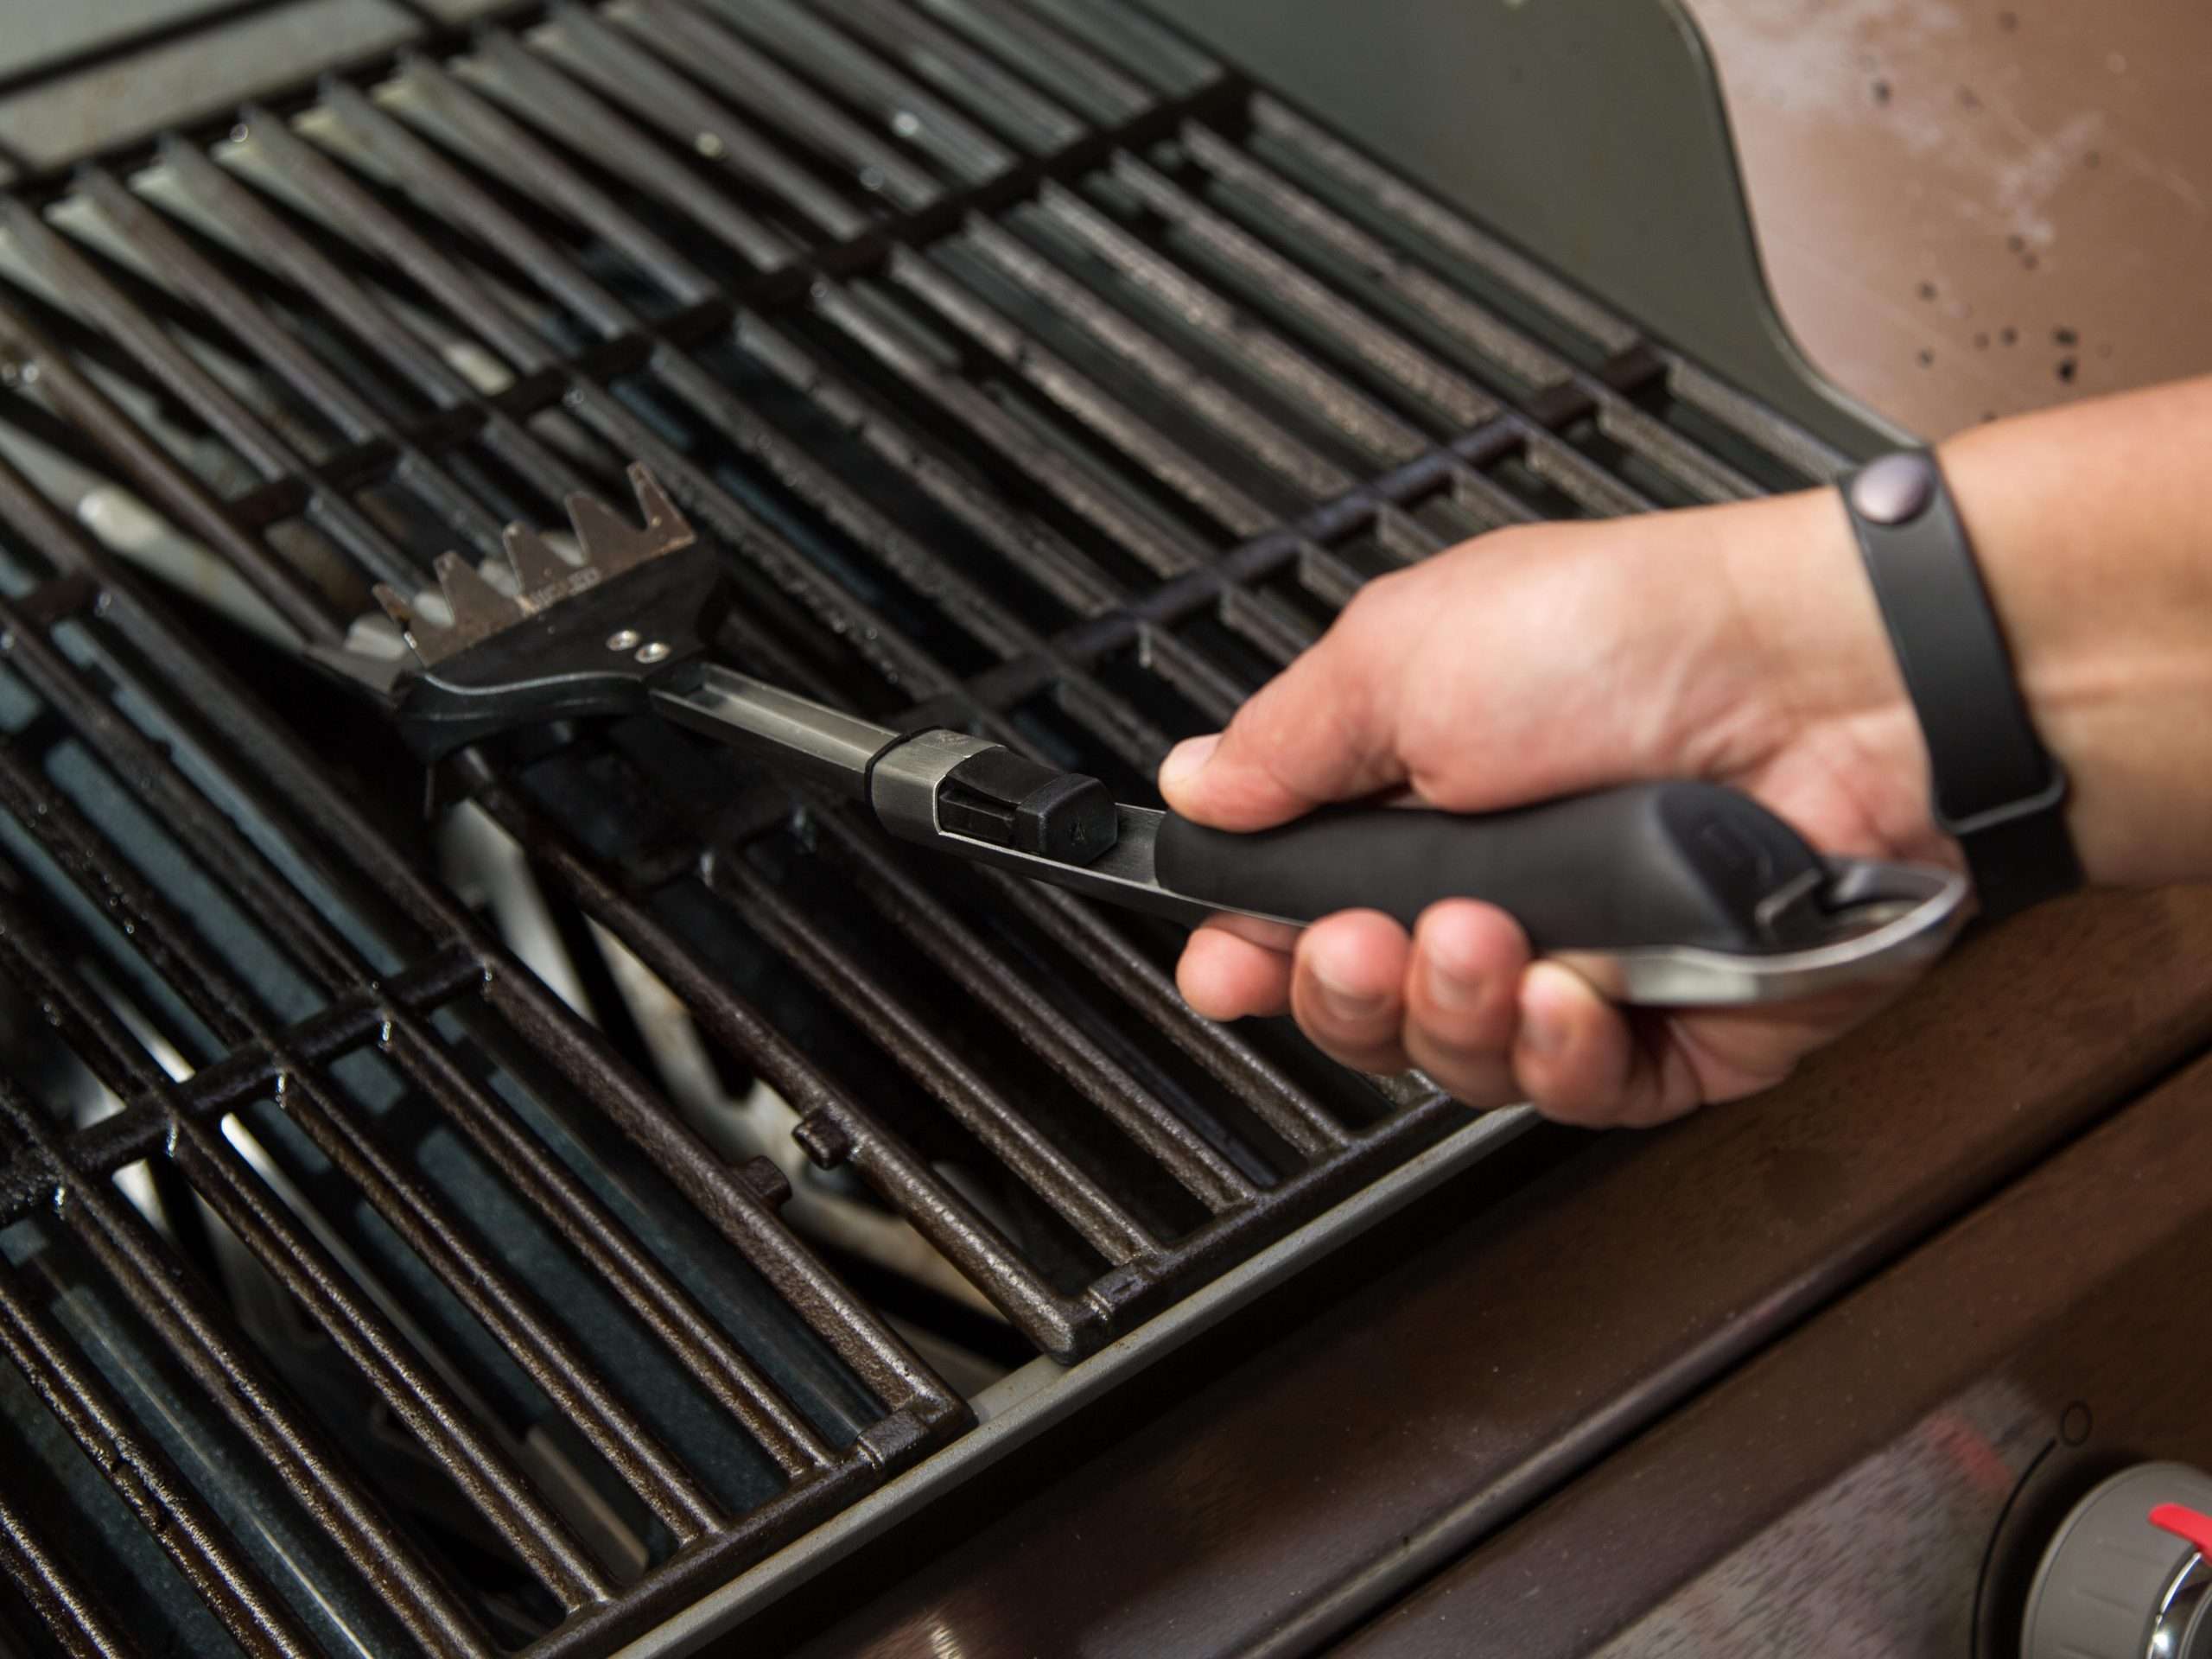 How to clean your grill: Grill grates are just the start